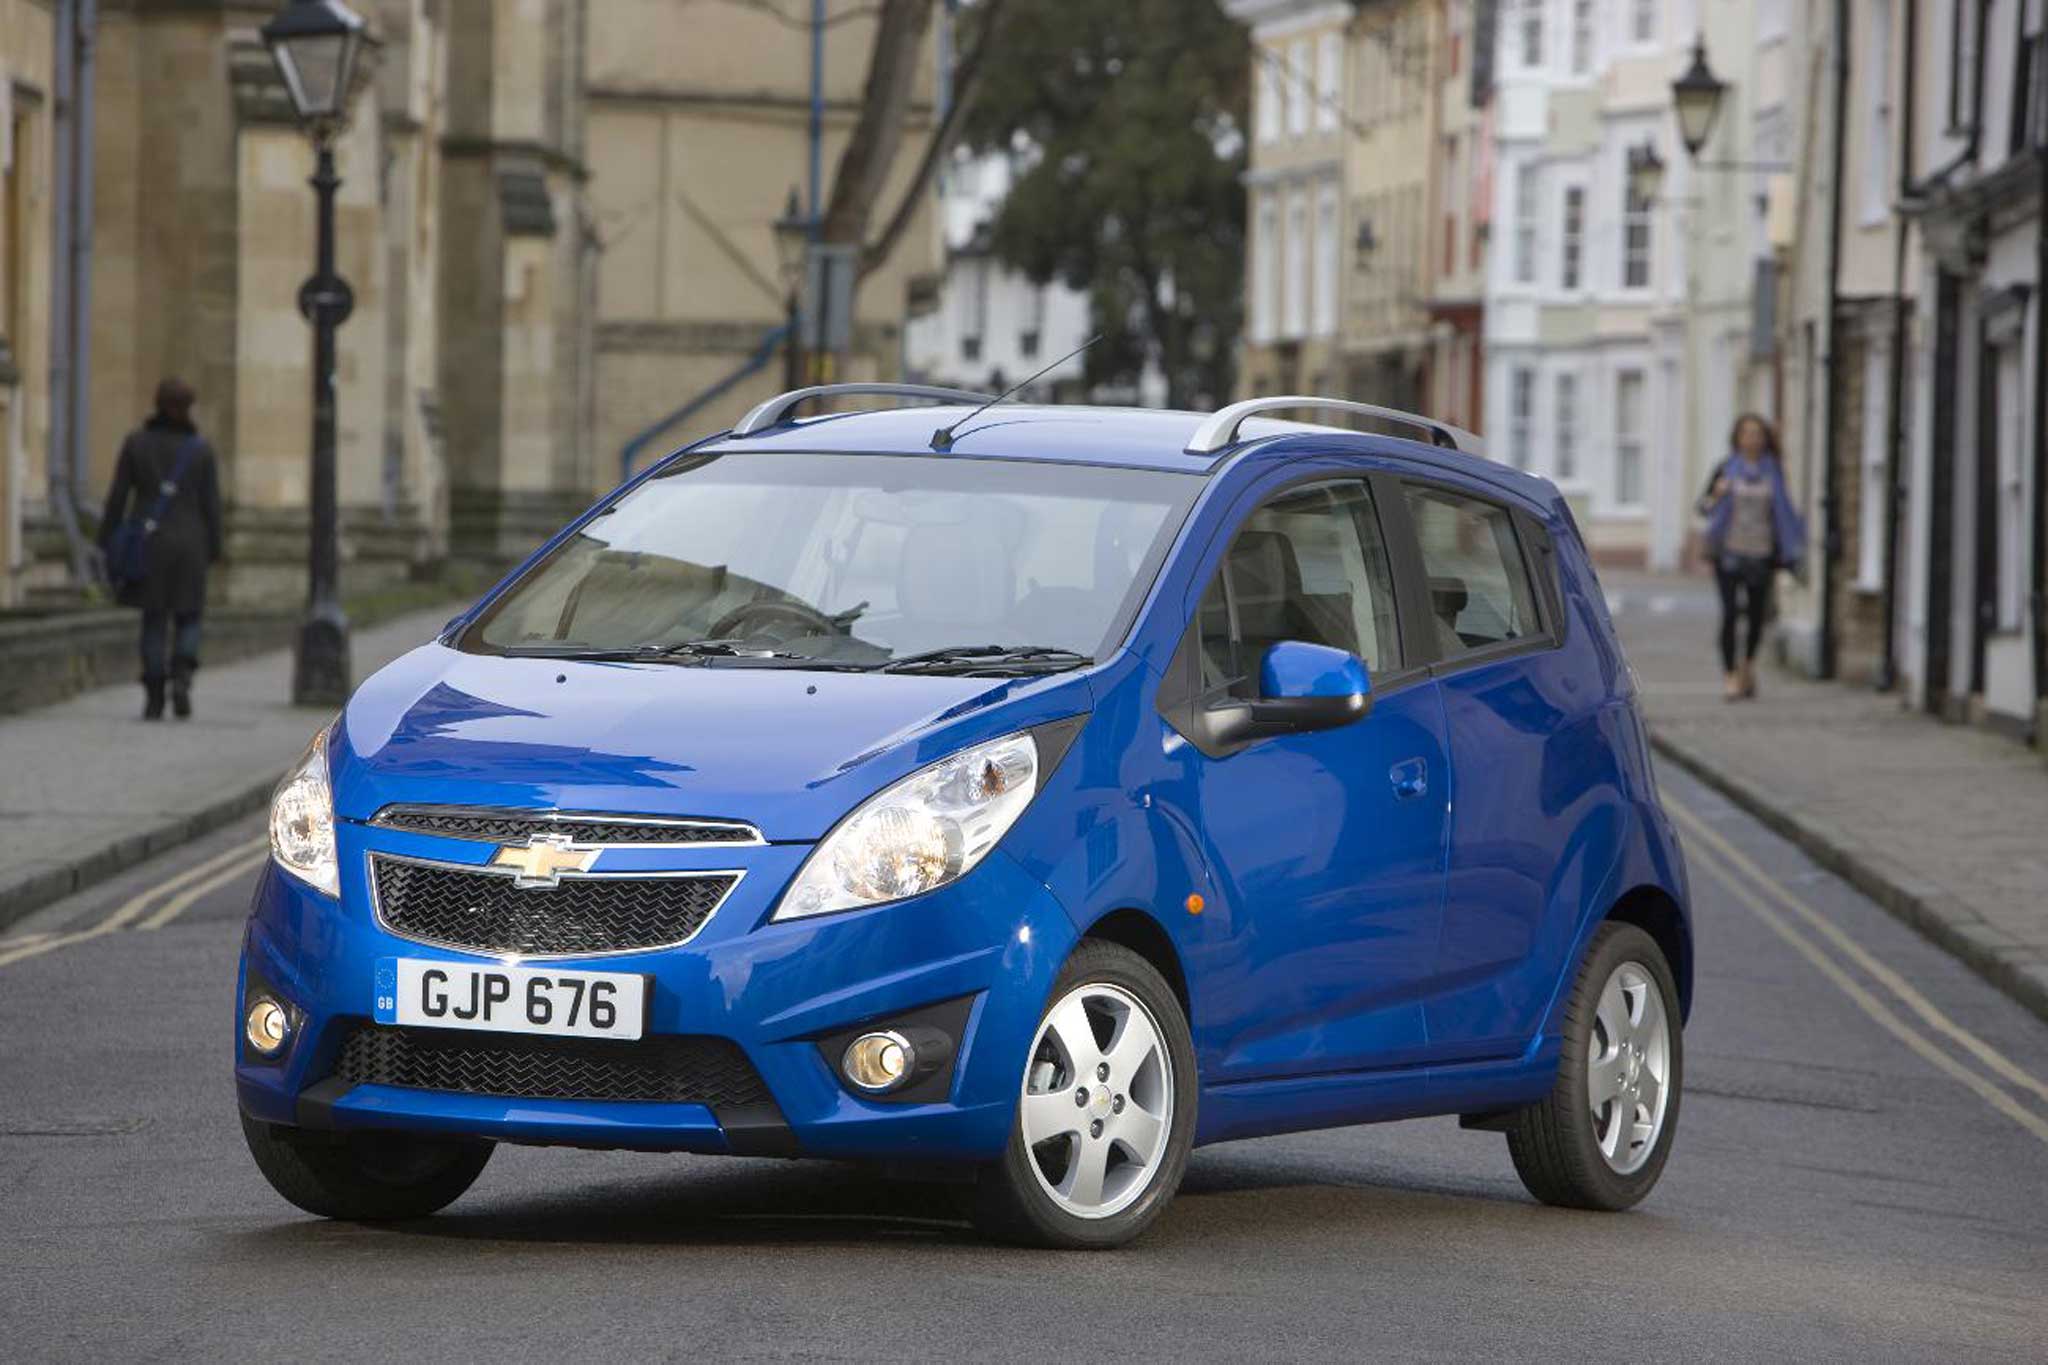 The Kia Rio is well-designed, spacious and comes with a seven-year warranty